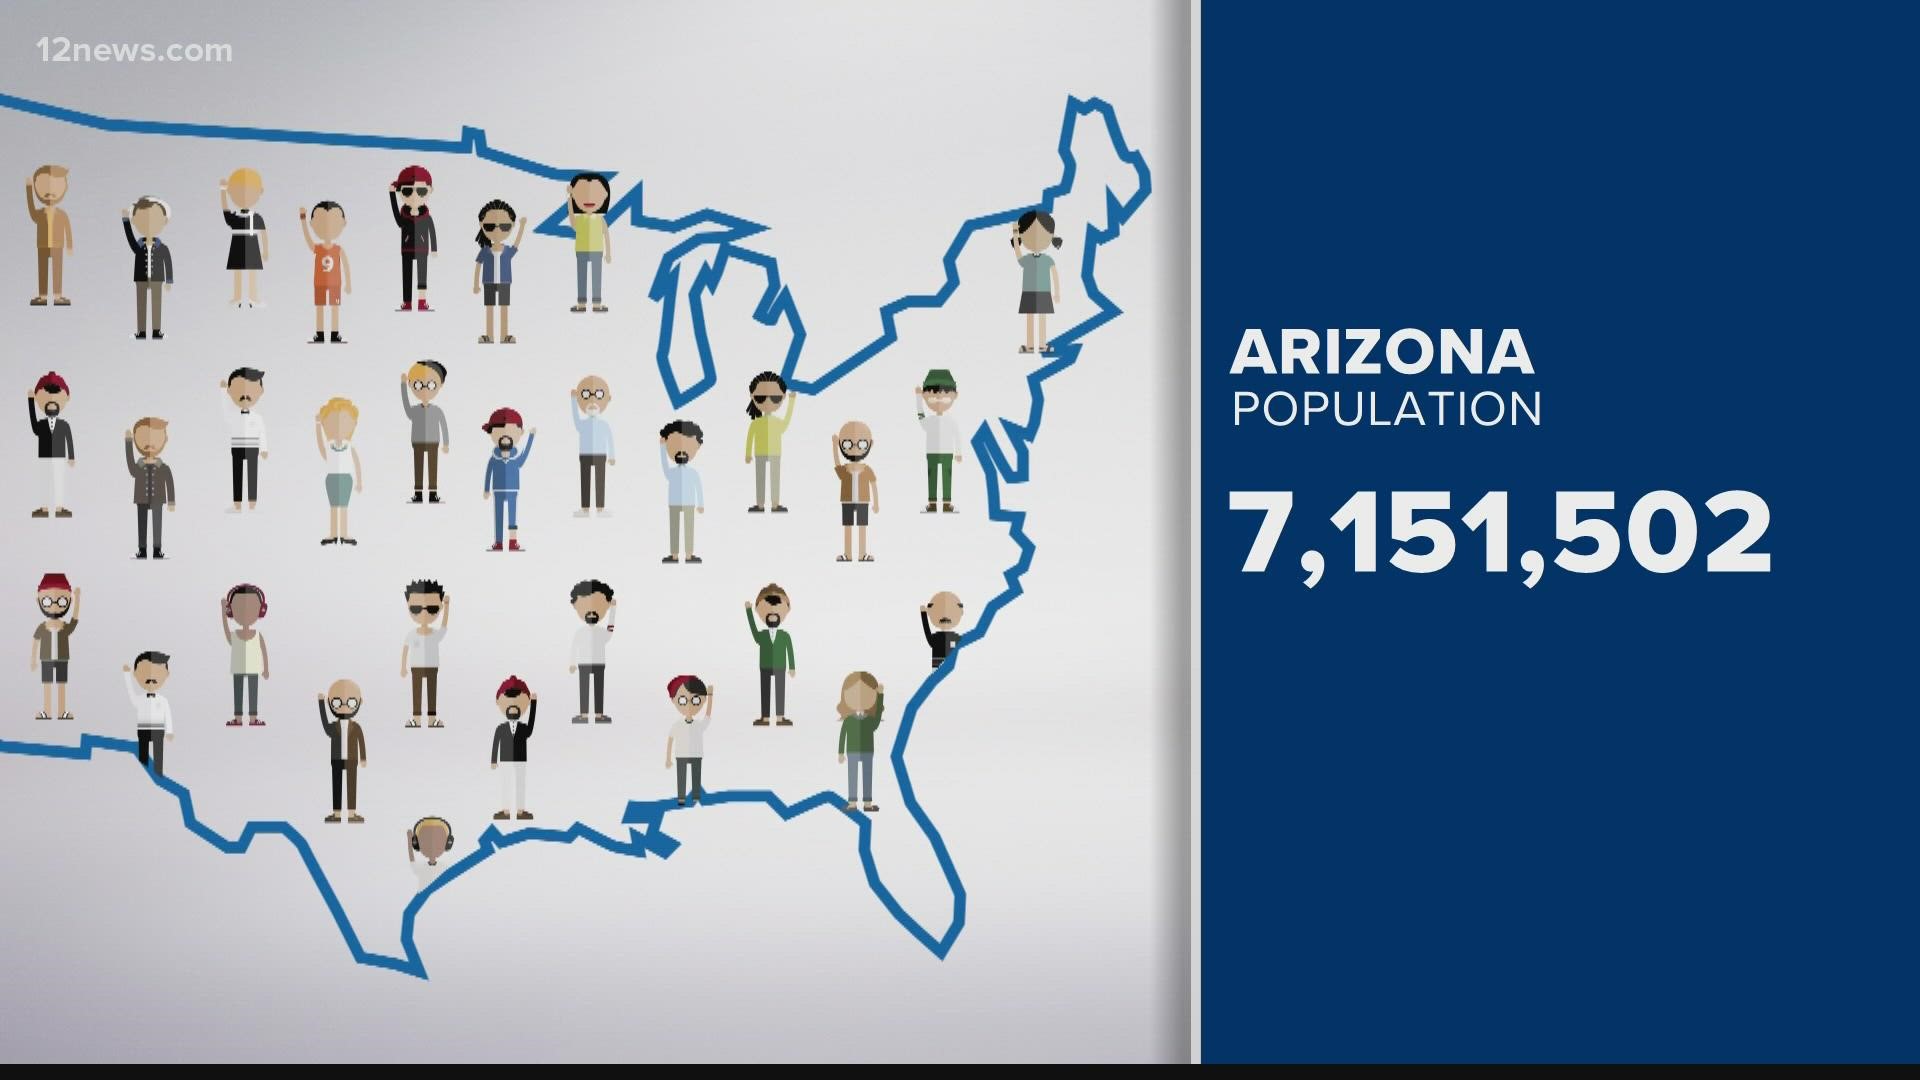 Arizona's population has increased in the last decade with more than 7 million residents recorded in the 2020 Census.